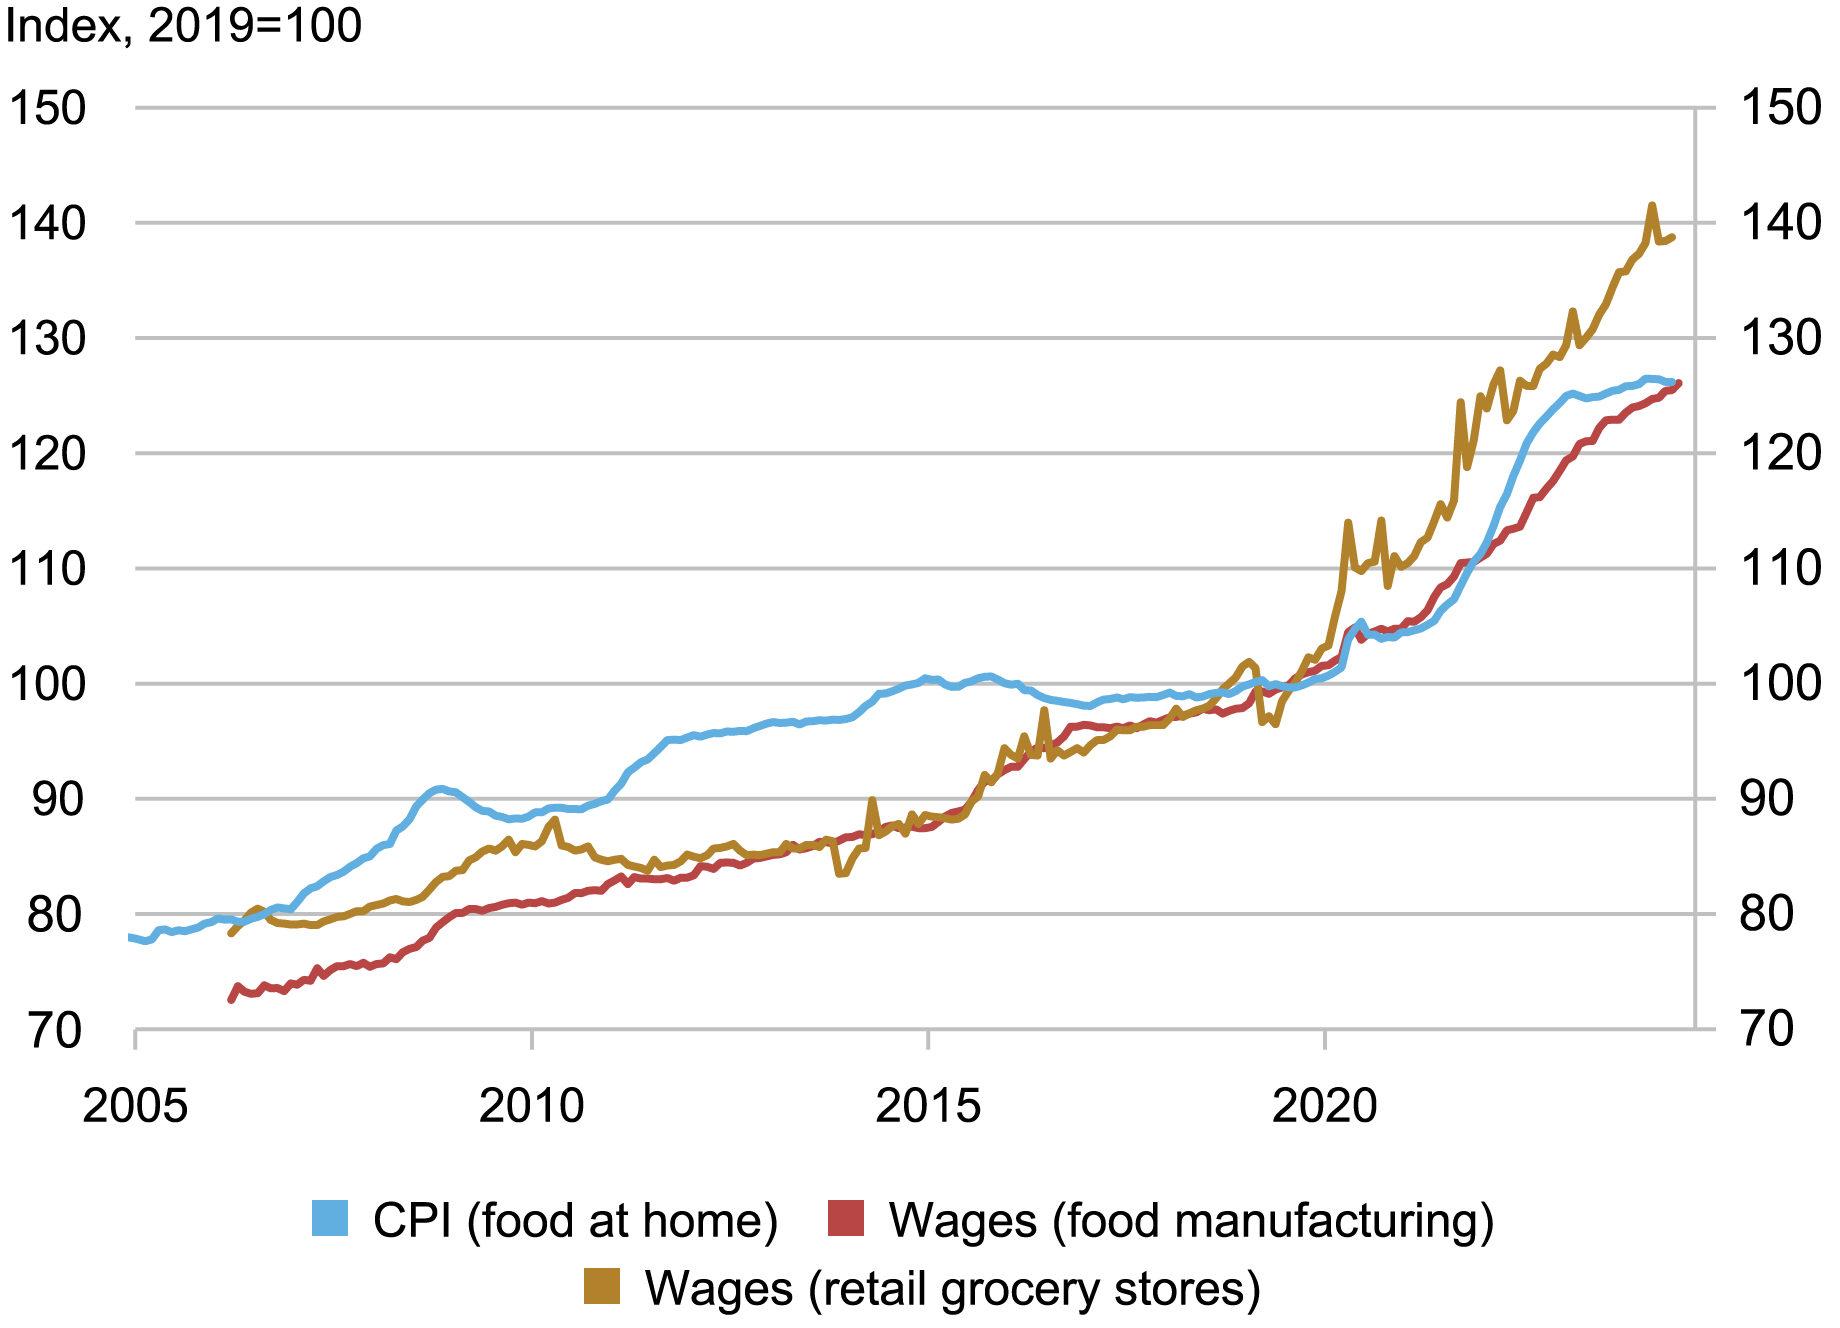 Alt=”line chart tracking CPI for food at home (blue), wages for food manufacturing (red), and wages for retail grocery stores (gold) indexes from 2005 through 2024” 